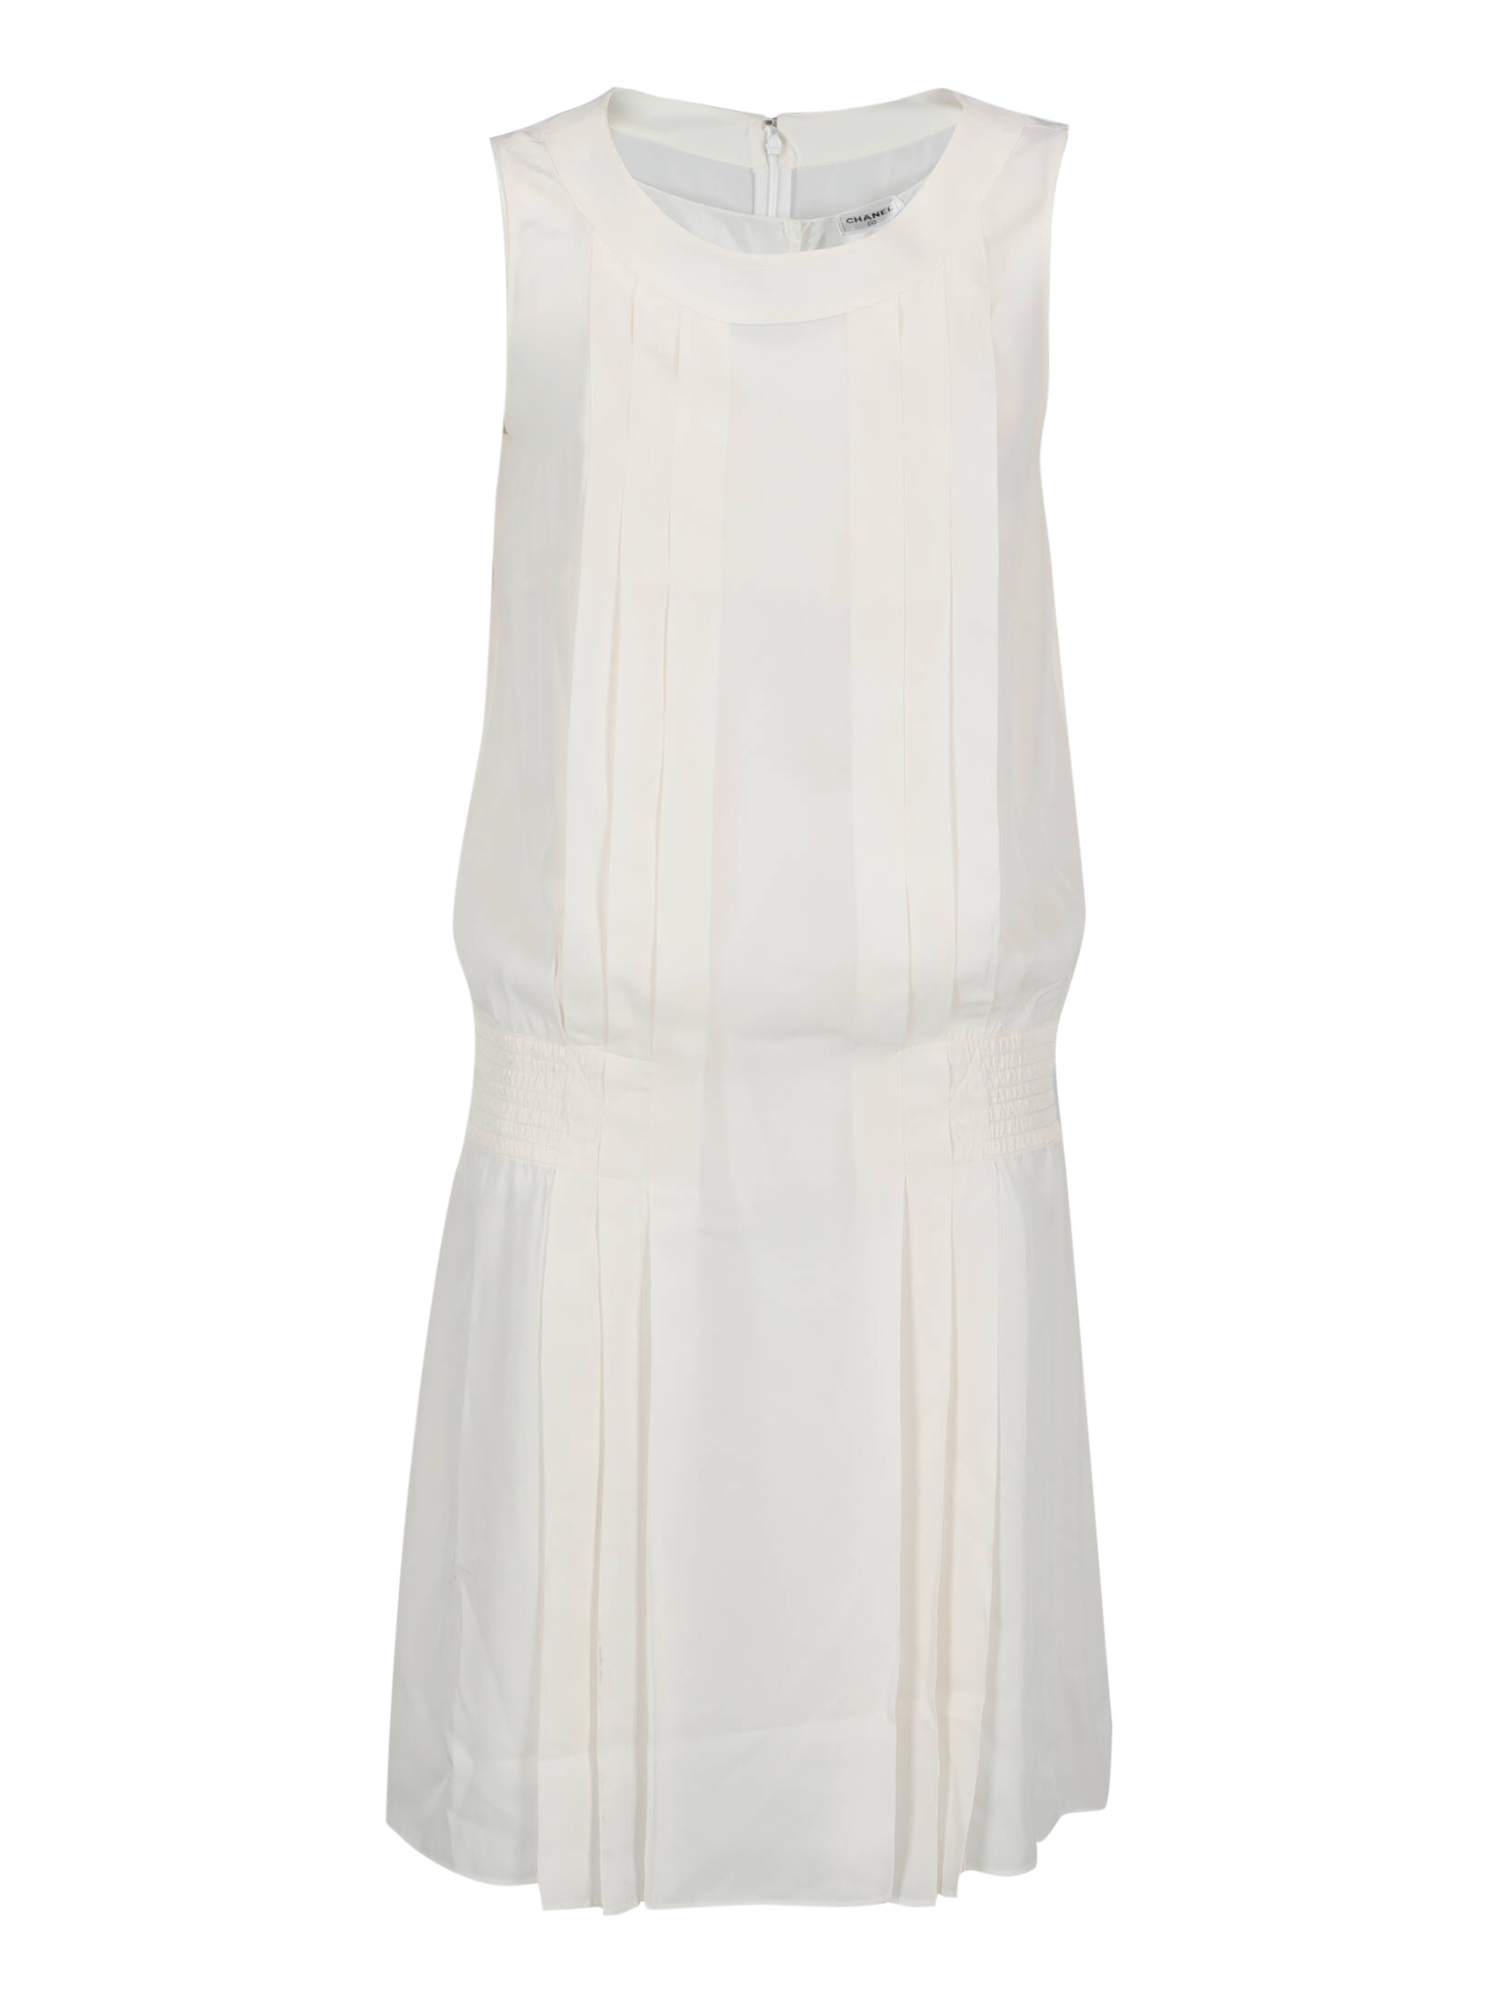 Robes Pour Femme - Chanel - En Silk White - Taille:  -